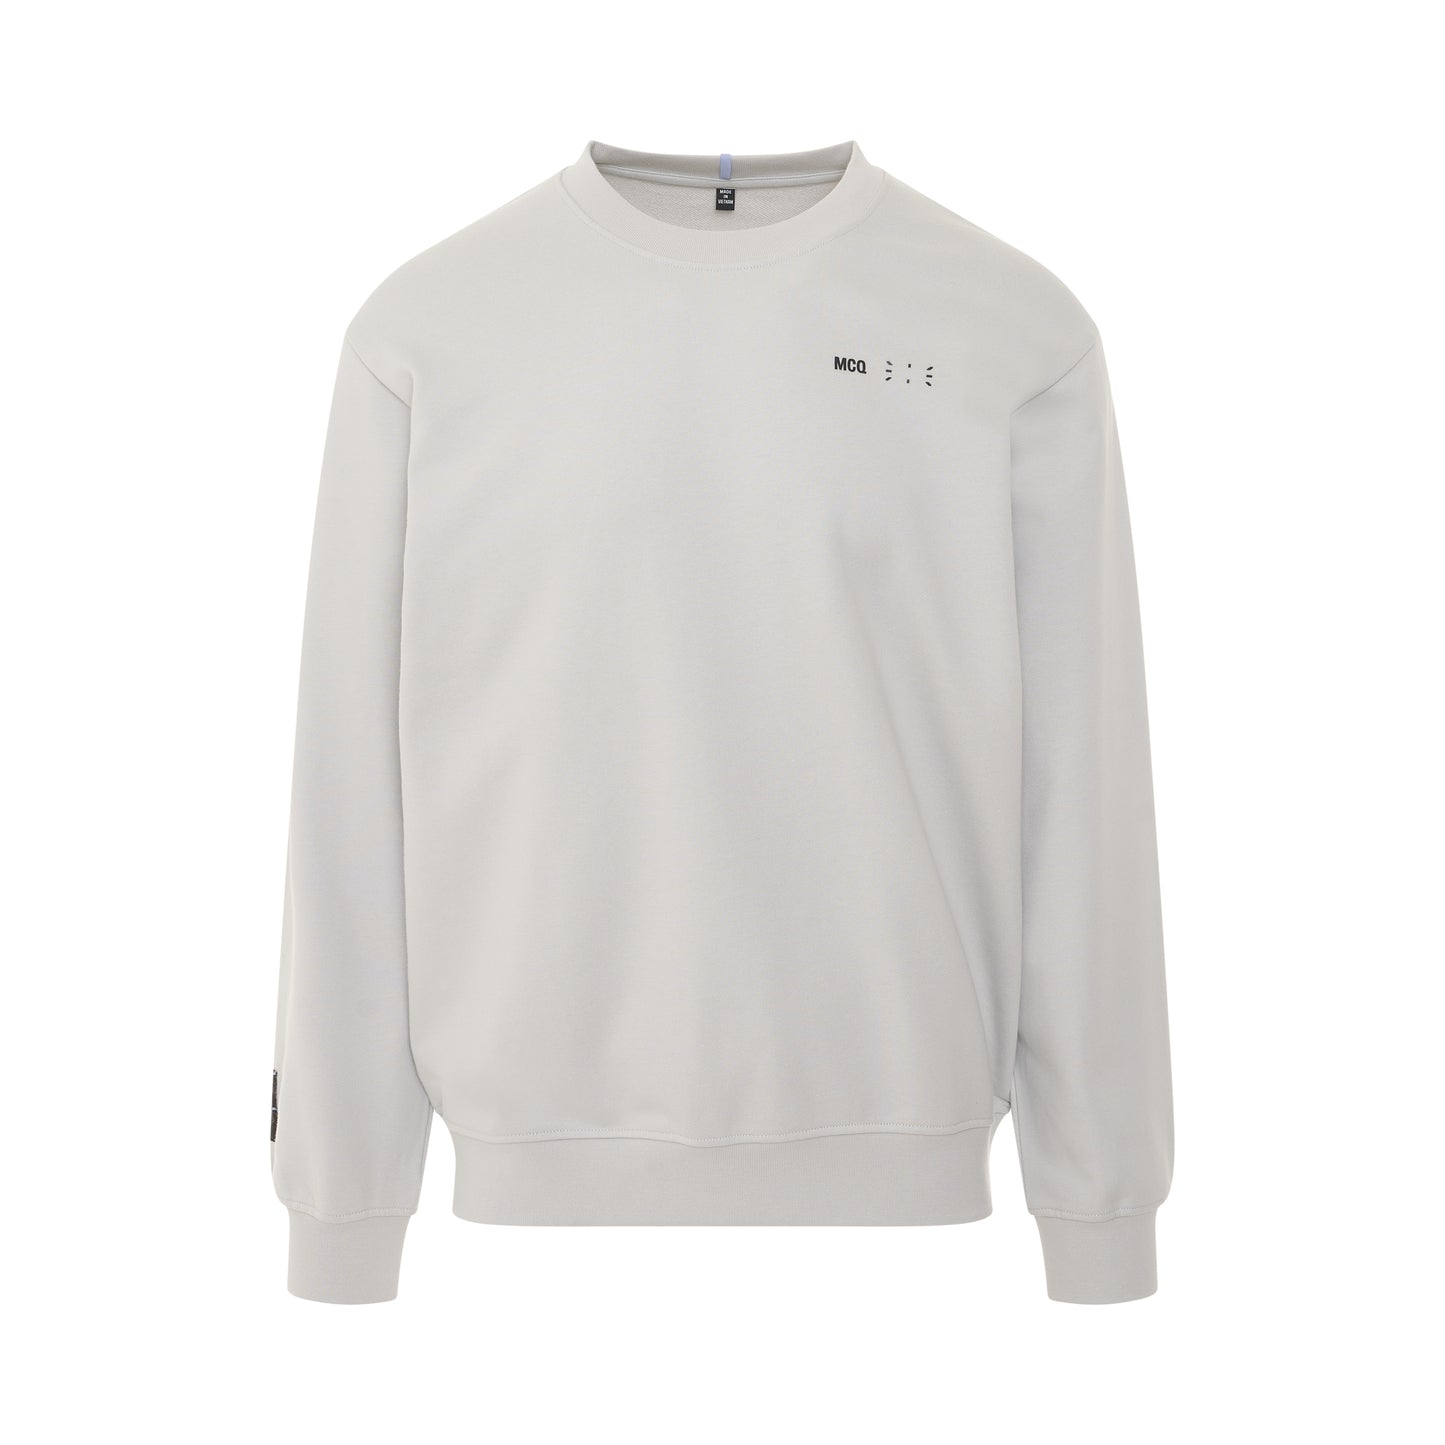 IC0 Embroidered Logo Sweatshirt in Alloy